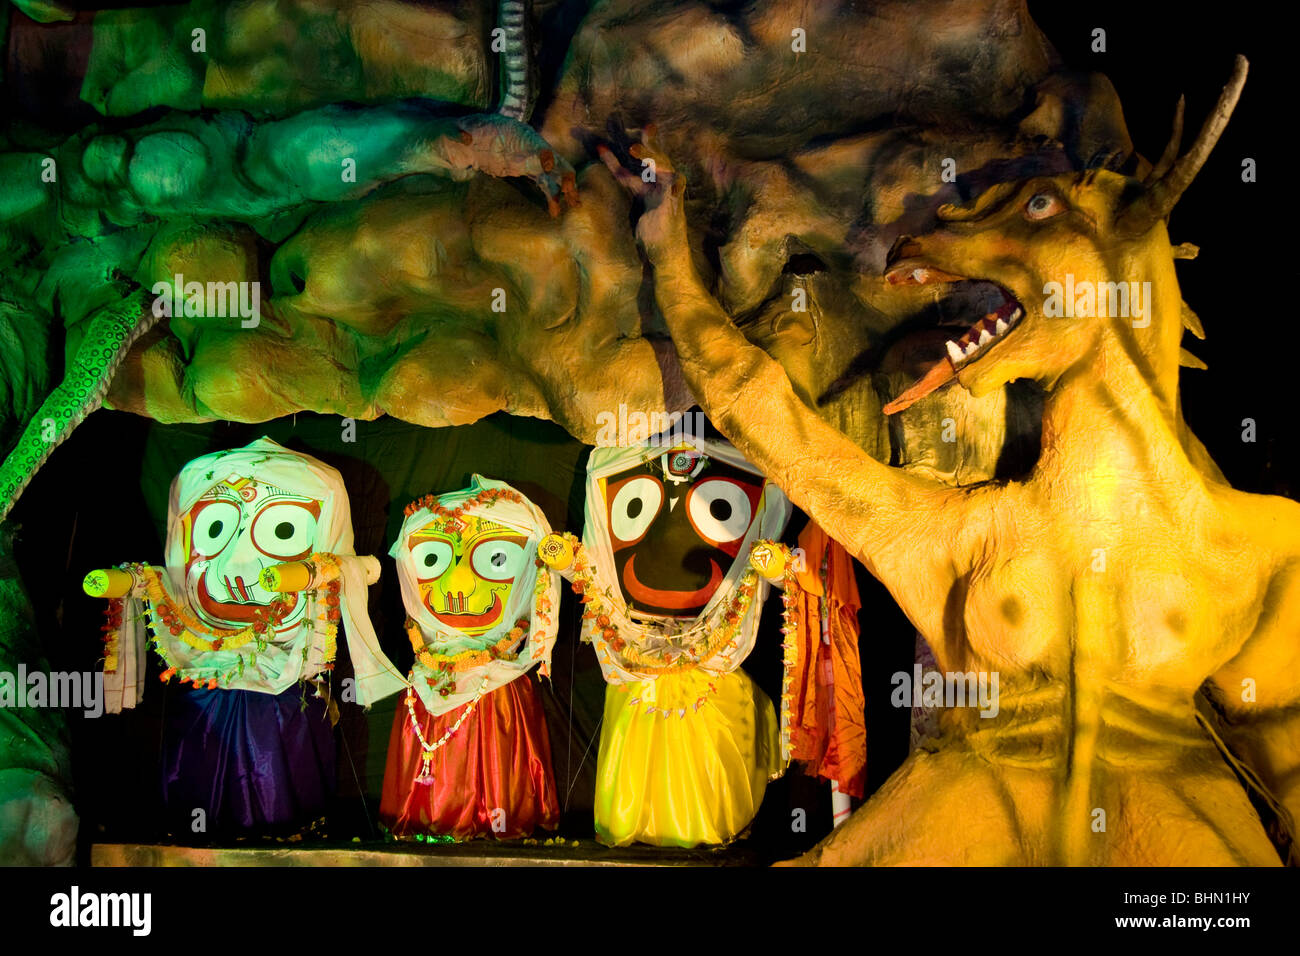 A tented pavilion presenting local deity Jagannath and his siblings has been set up during Ganpati in Puri, Orissa, India Stock Photo